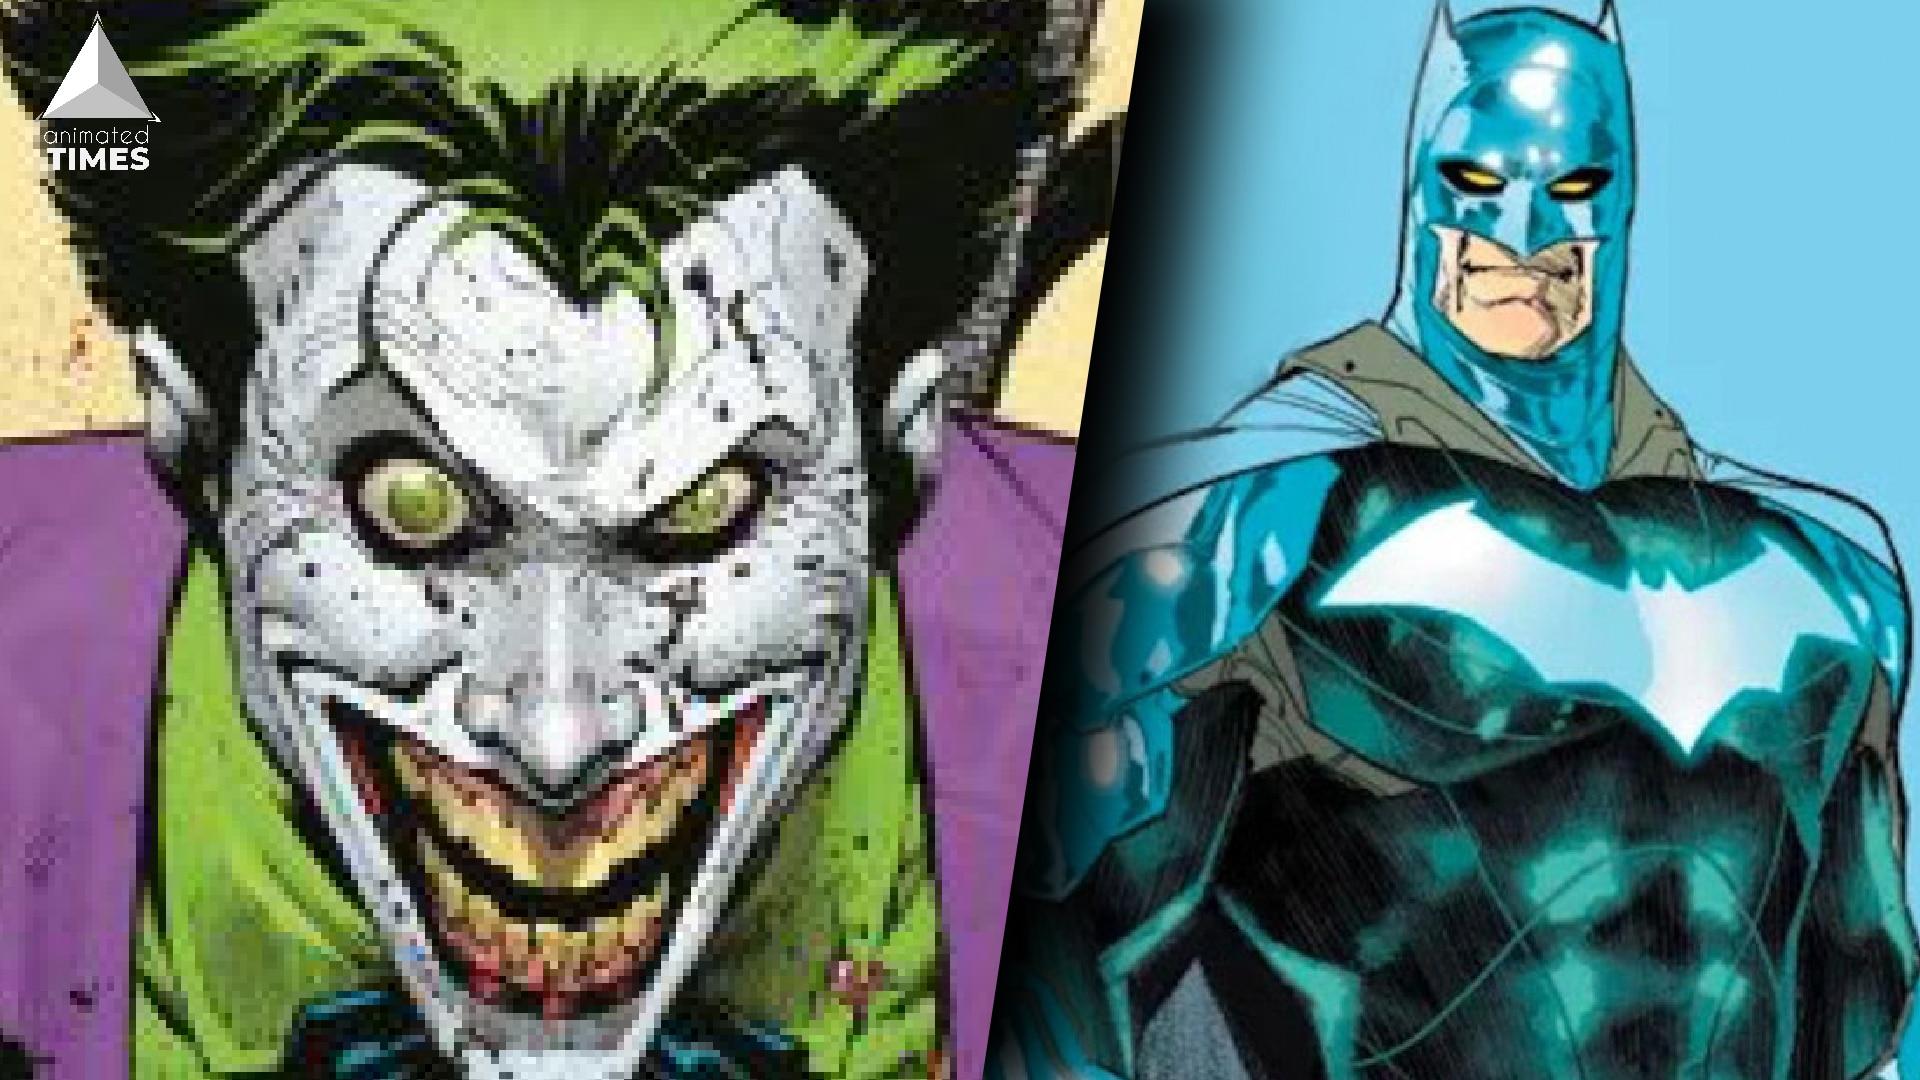 Batman Comes Up With A New Costume in DC Comics